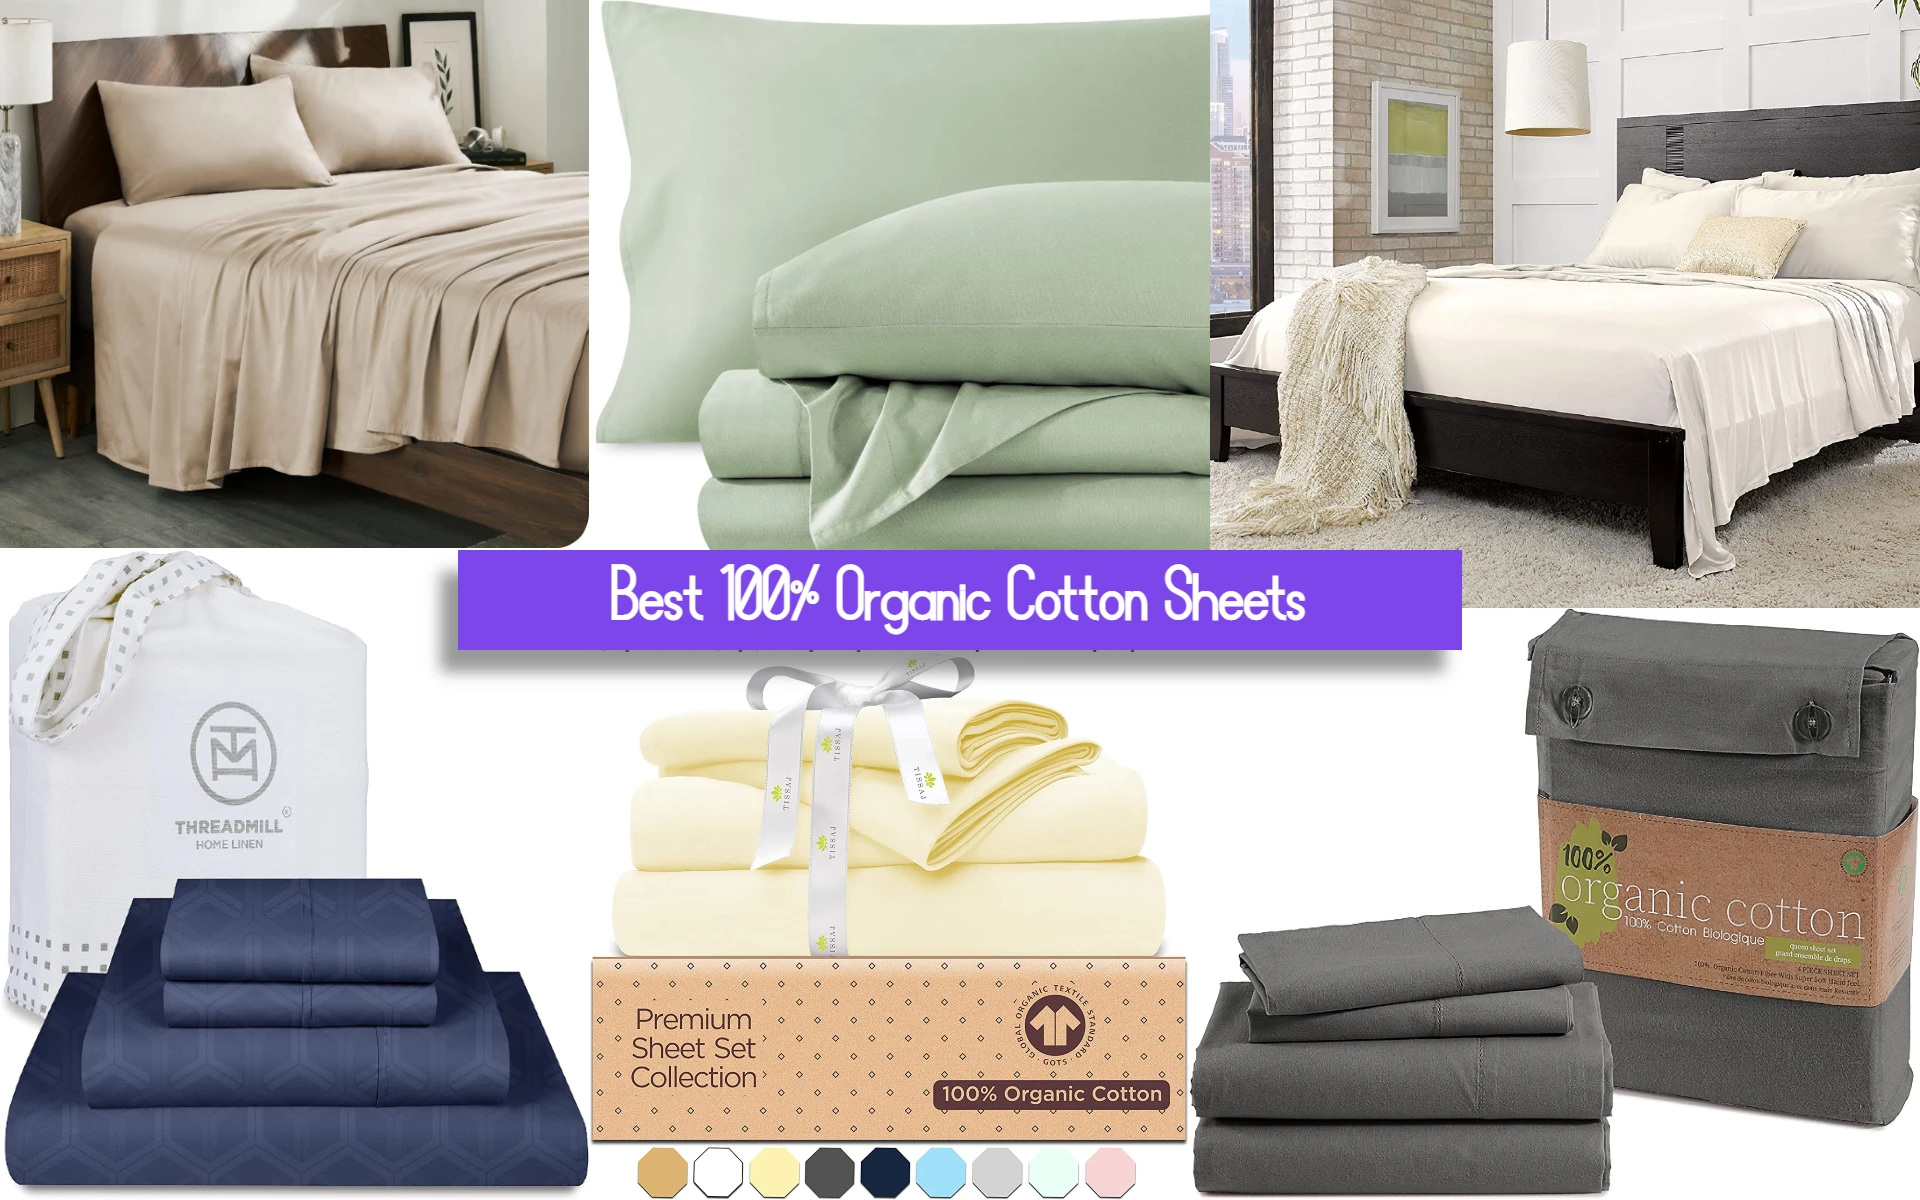 Best Organic Cotton Sheets for bed